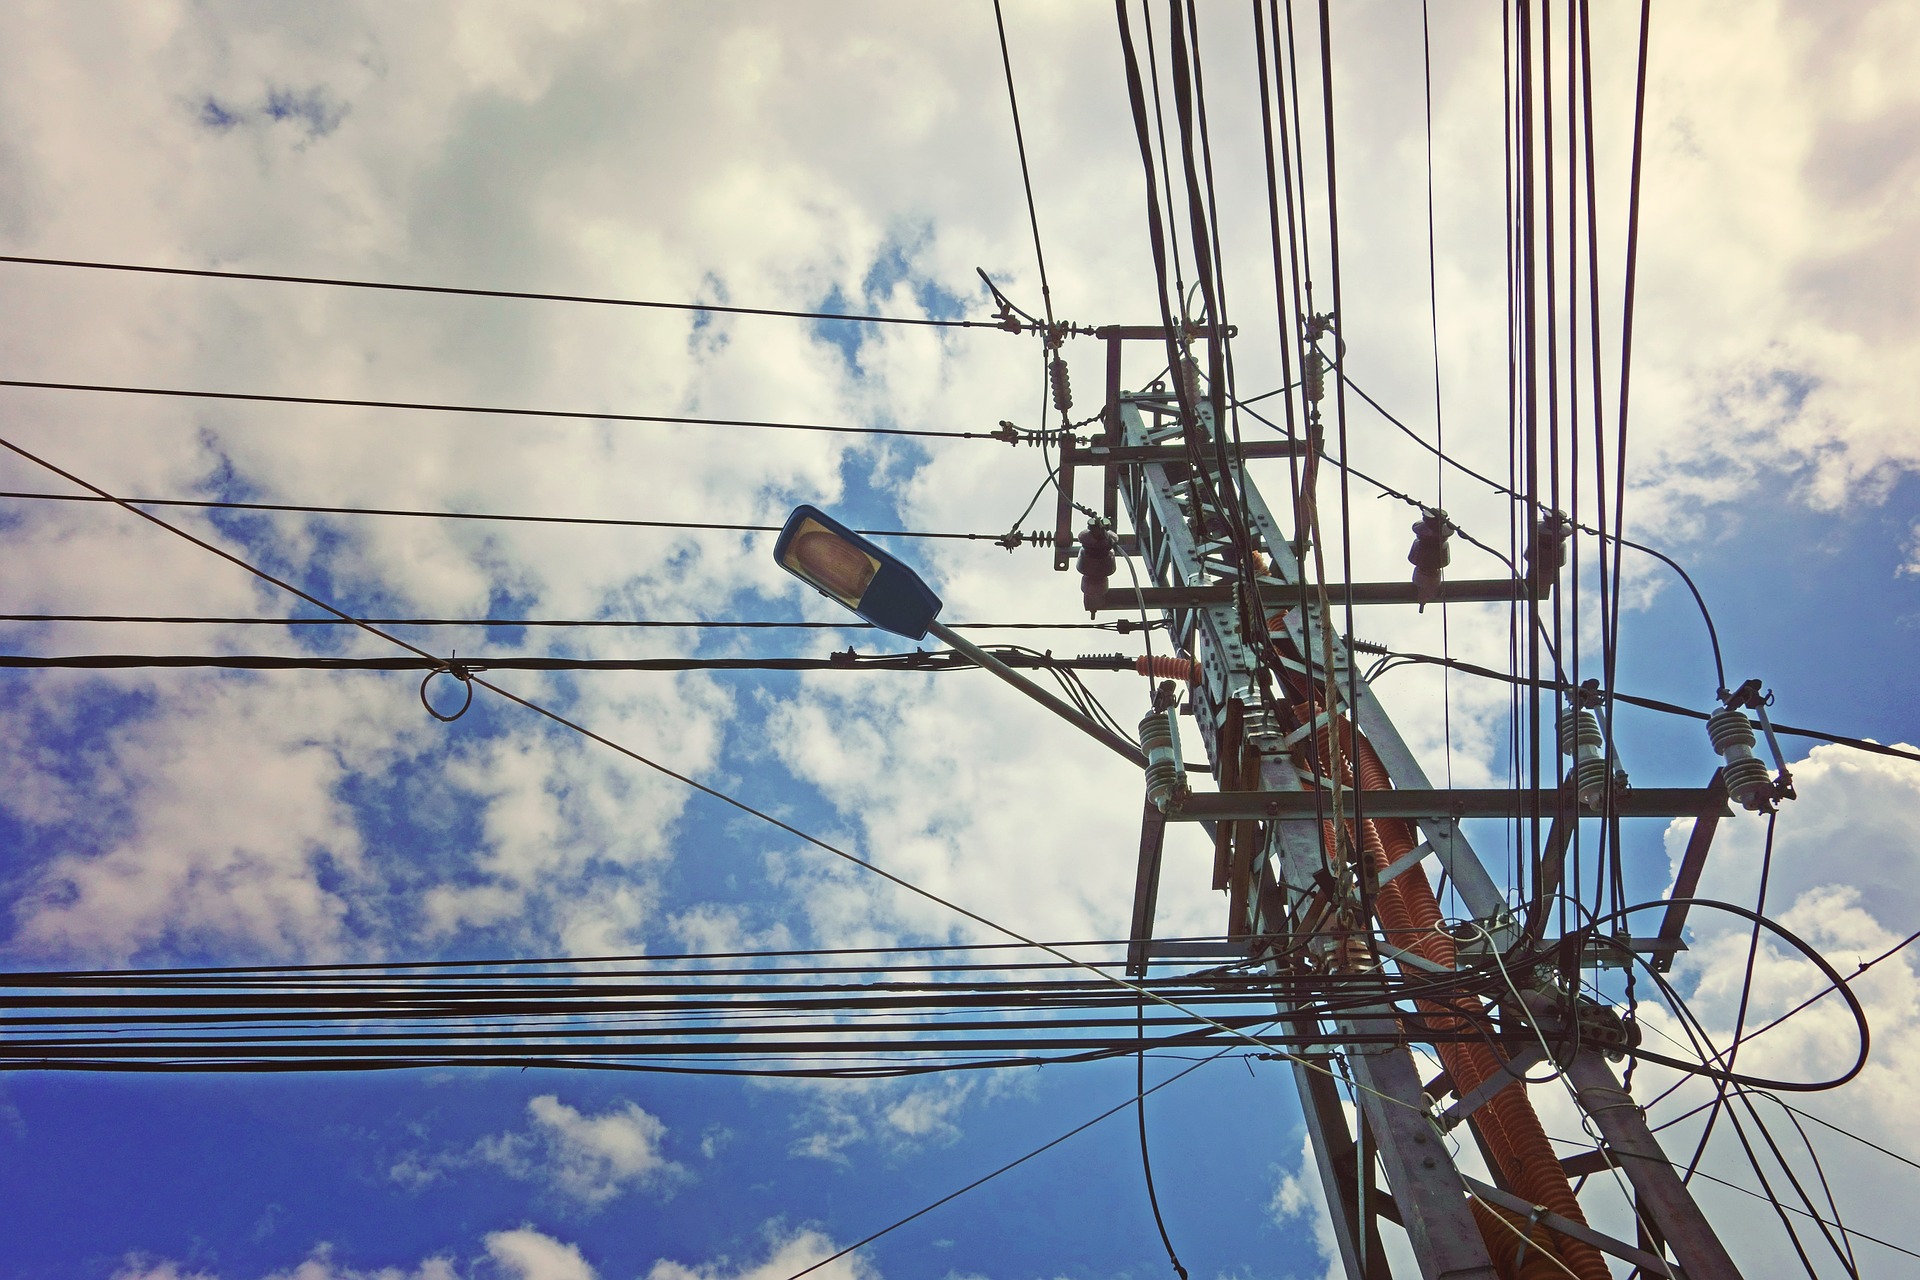 A stock photo of power/electric lines.